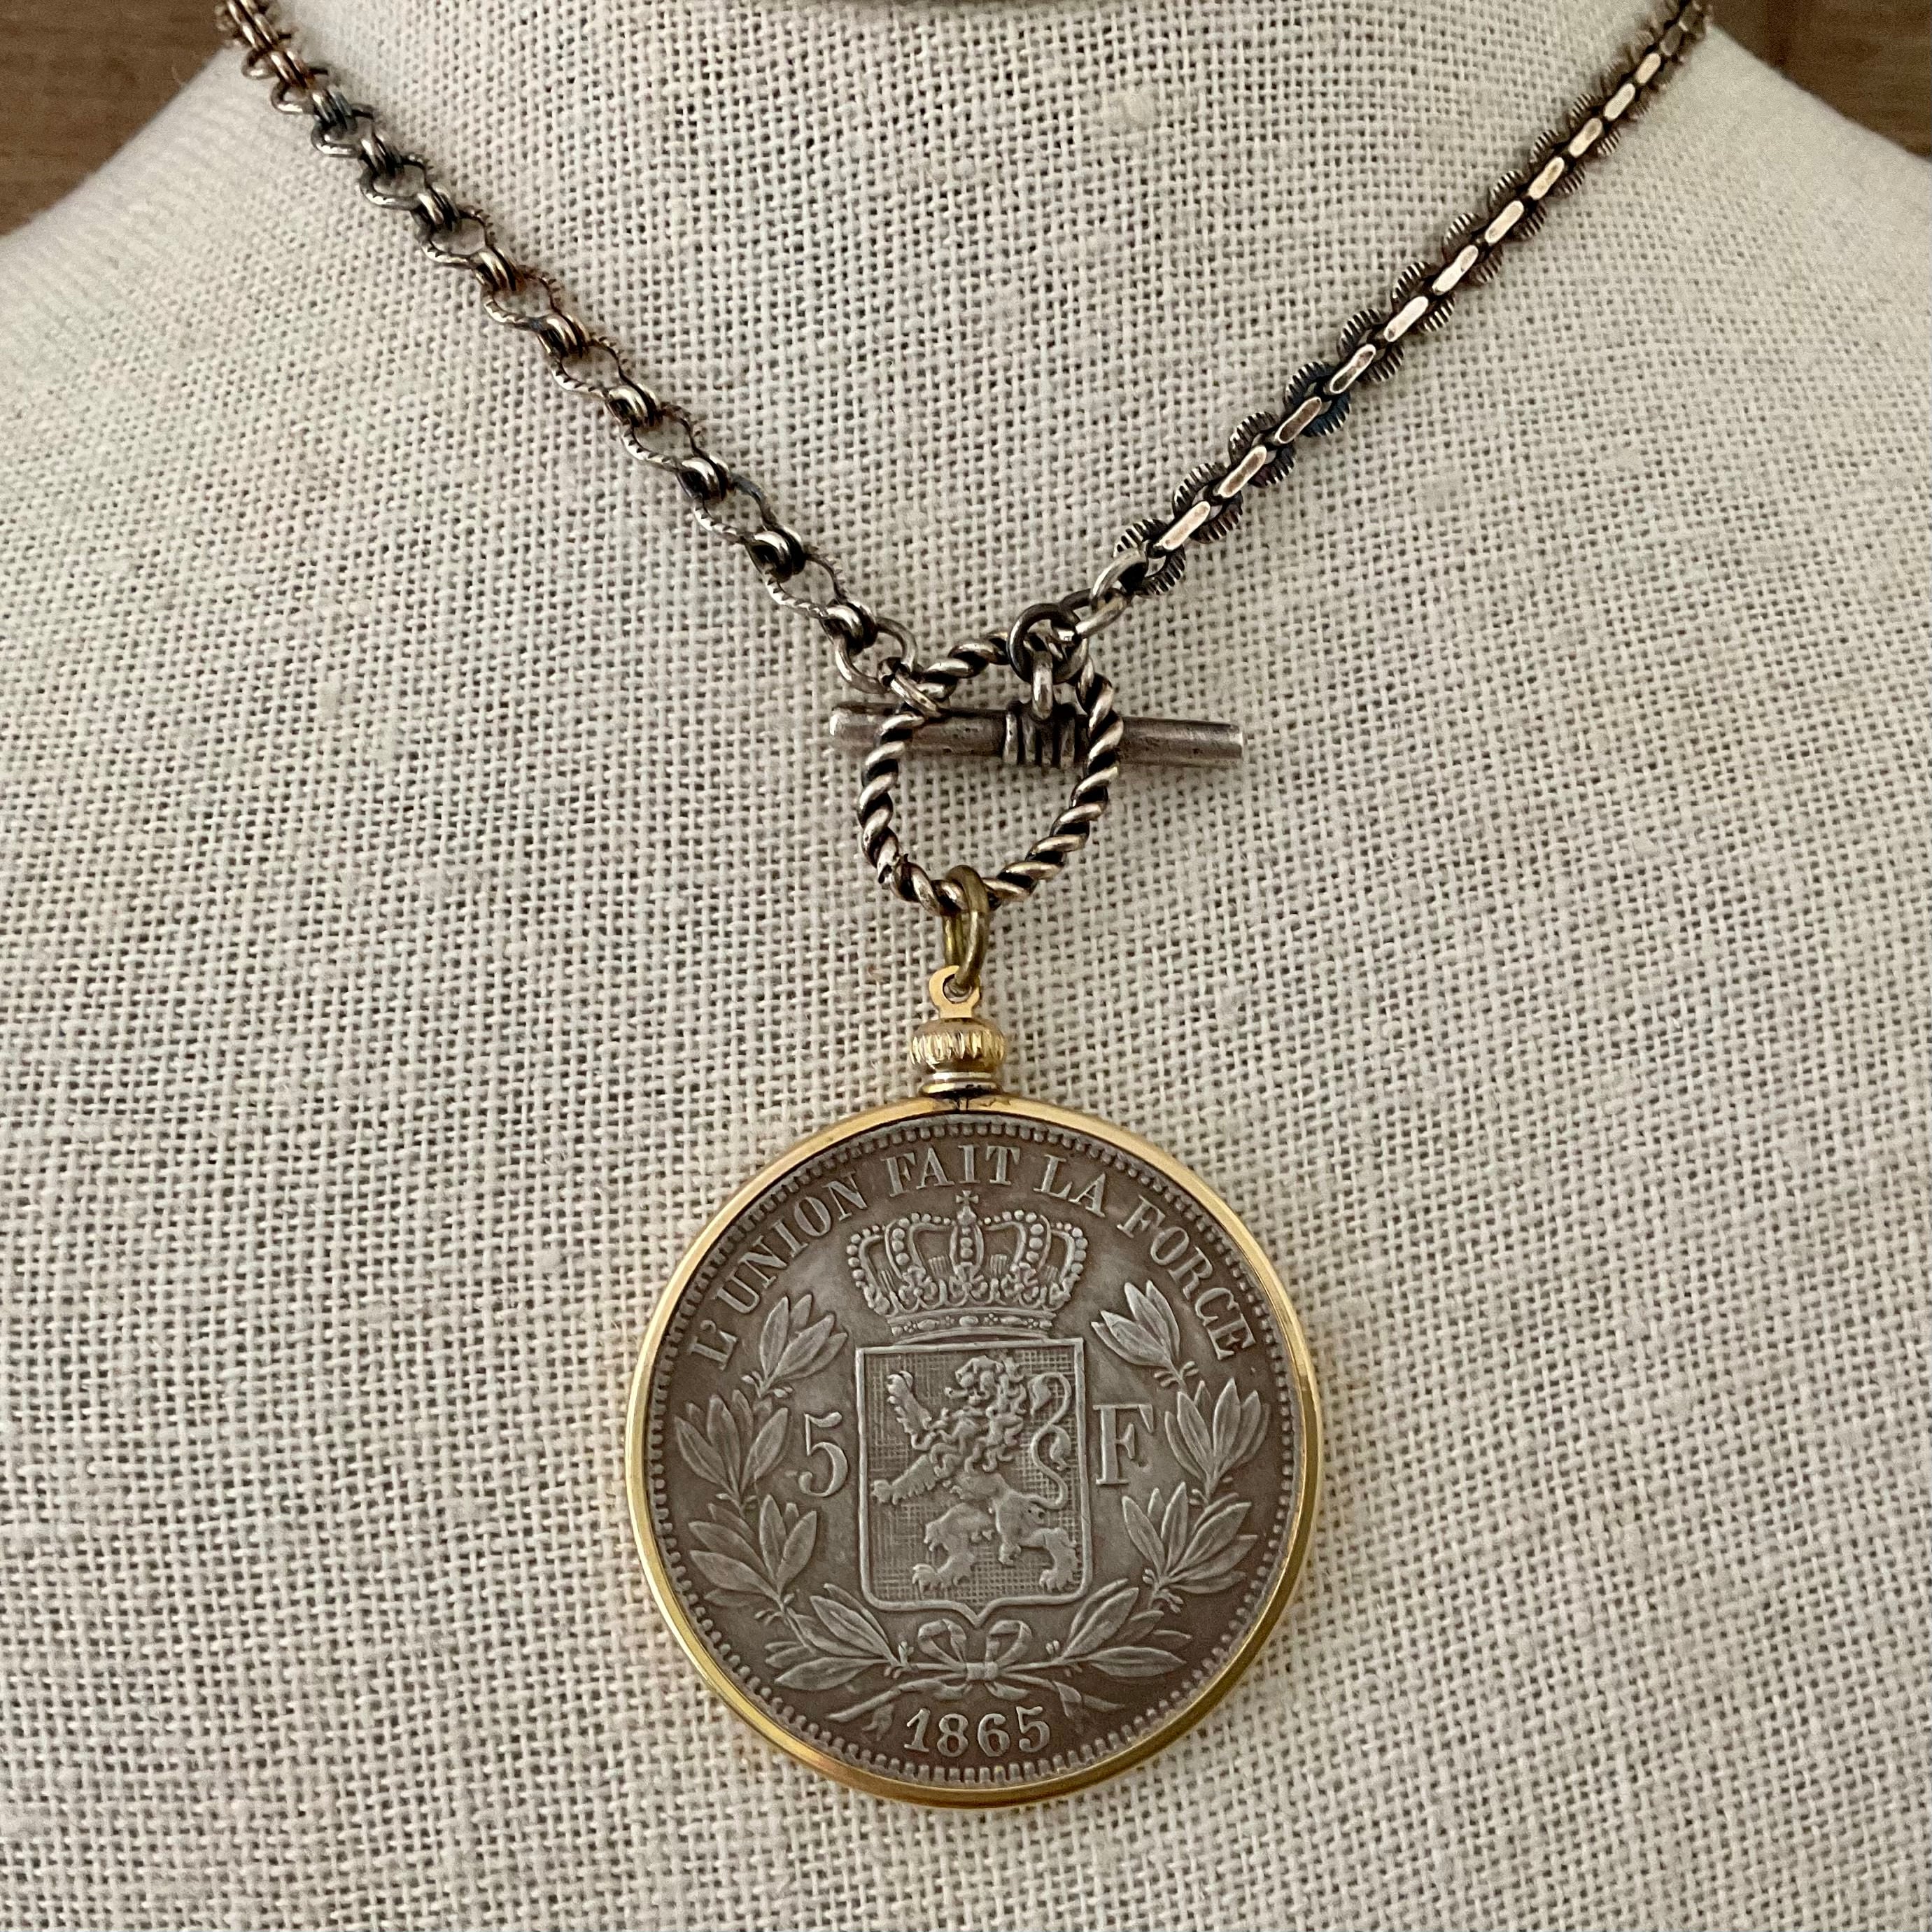 Vintage Sterling Chain with Belgian Coin Circa 1865